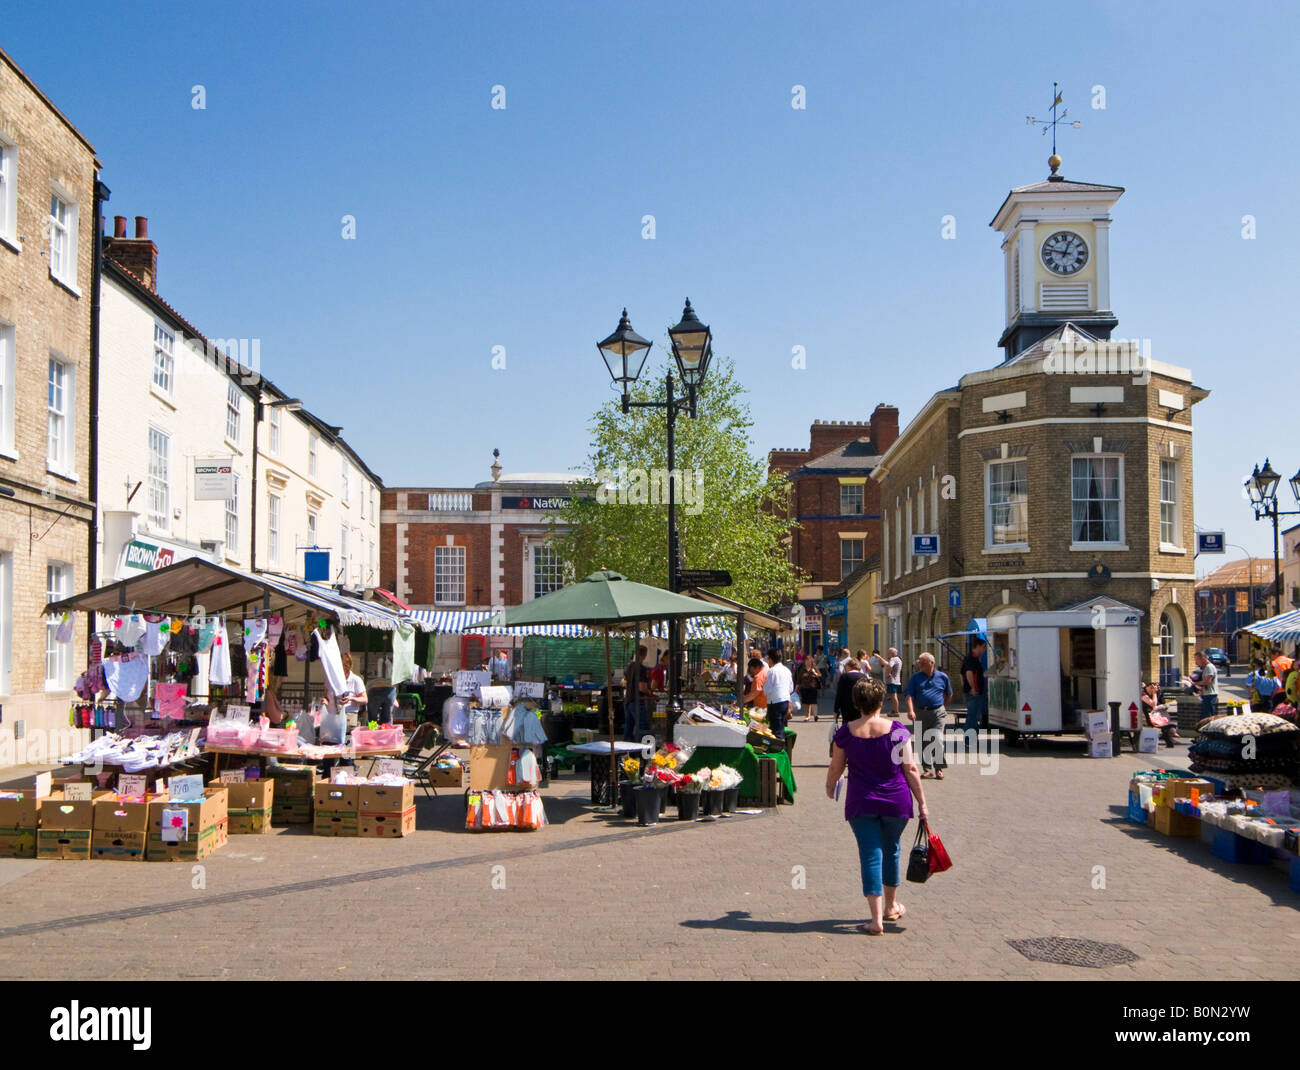 Clock Tower and market stalls in the town centre at Brigg, North Lincolnshire, UK Stock Photo